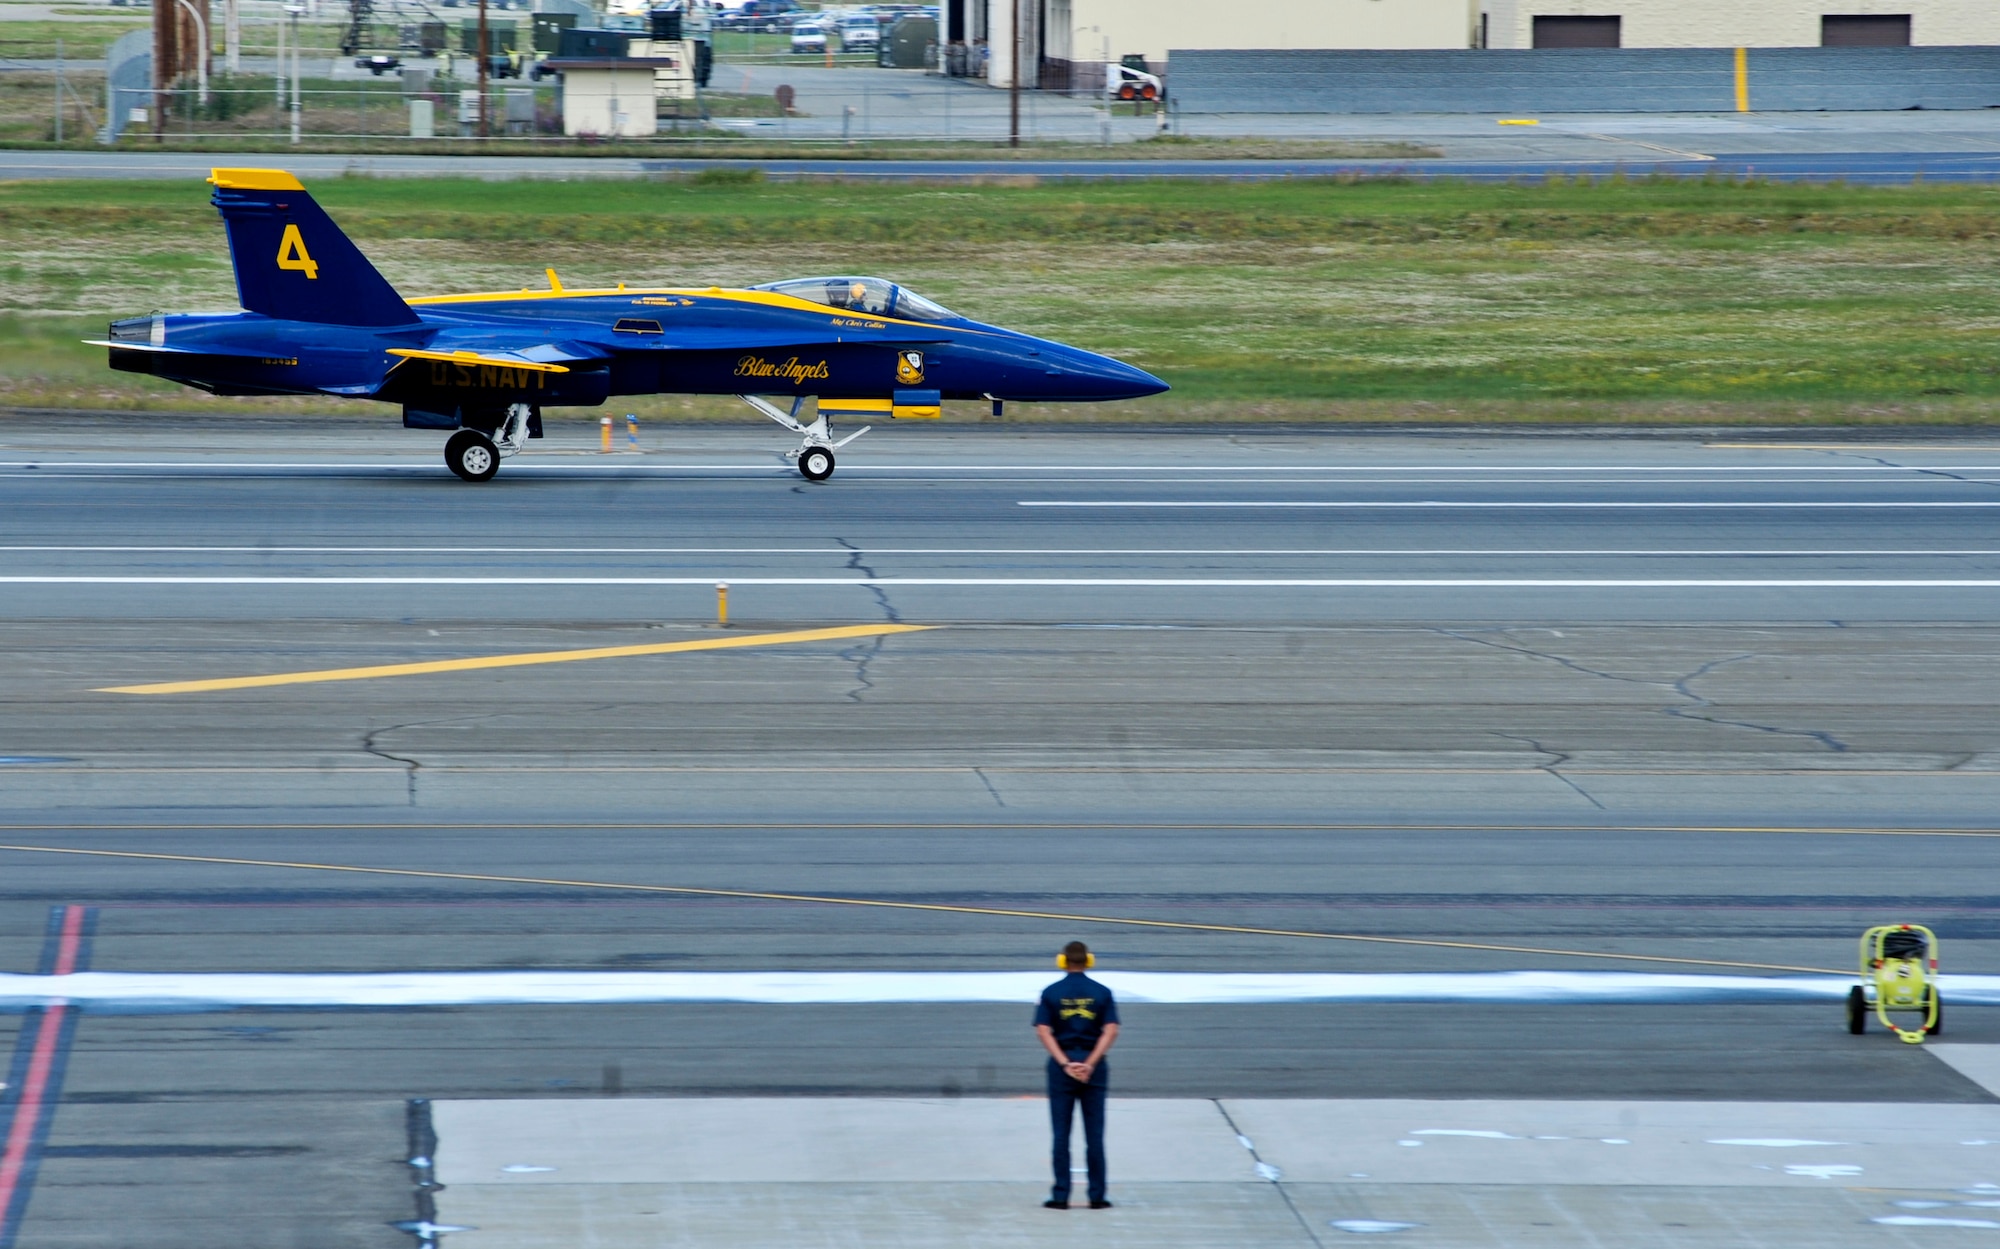 JOINT BASE ELMENDORF-RICHARDSON, Alaska – A Blue Angel makes his way down Joint Base Elmendorf-Richardson’s runway after landing here July 27. The Blue Angels will be one of the main performances during this year’s Arctic Thunder Air Show, taking place July 31 and Aug. 1. Gates open at 9 a.m. and parking and admission are free. (Air Force photo by Airman 1st Class Christopher Gross)